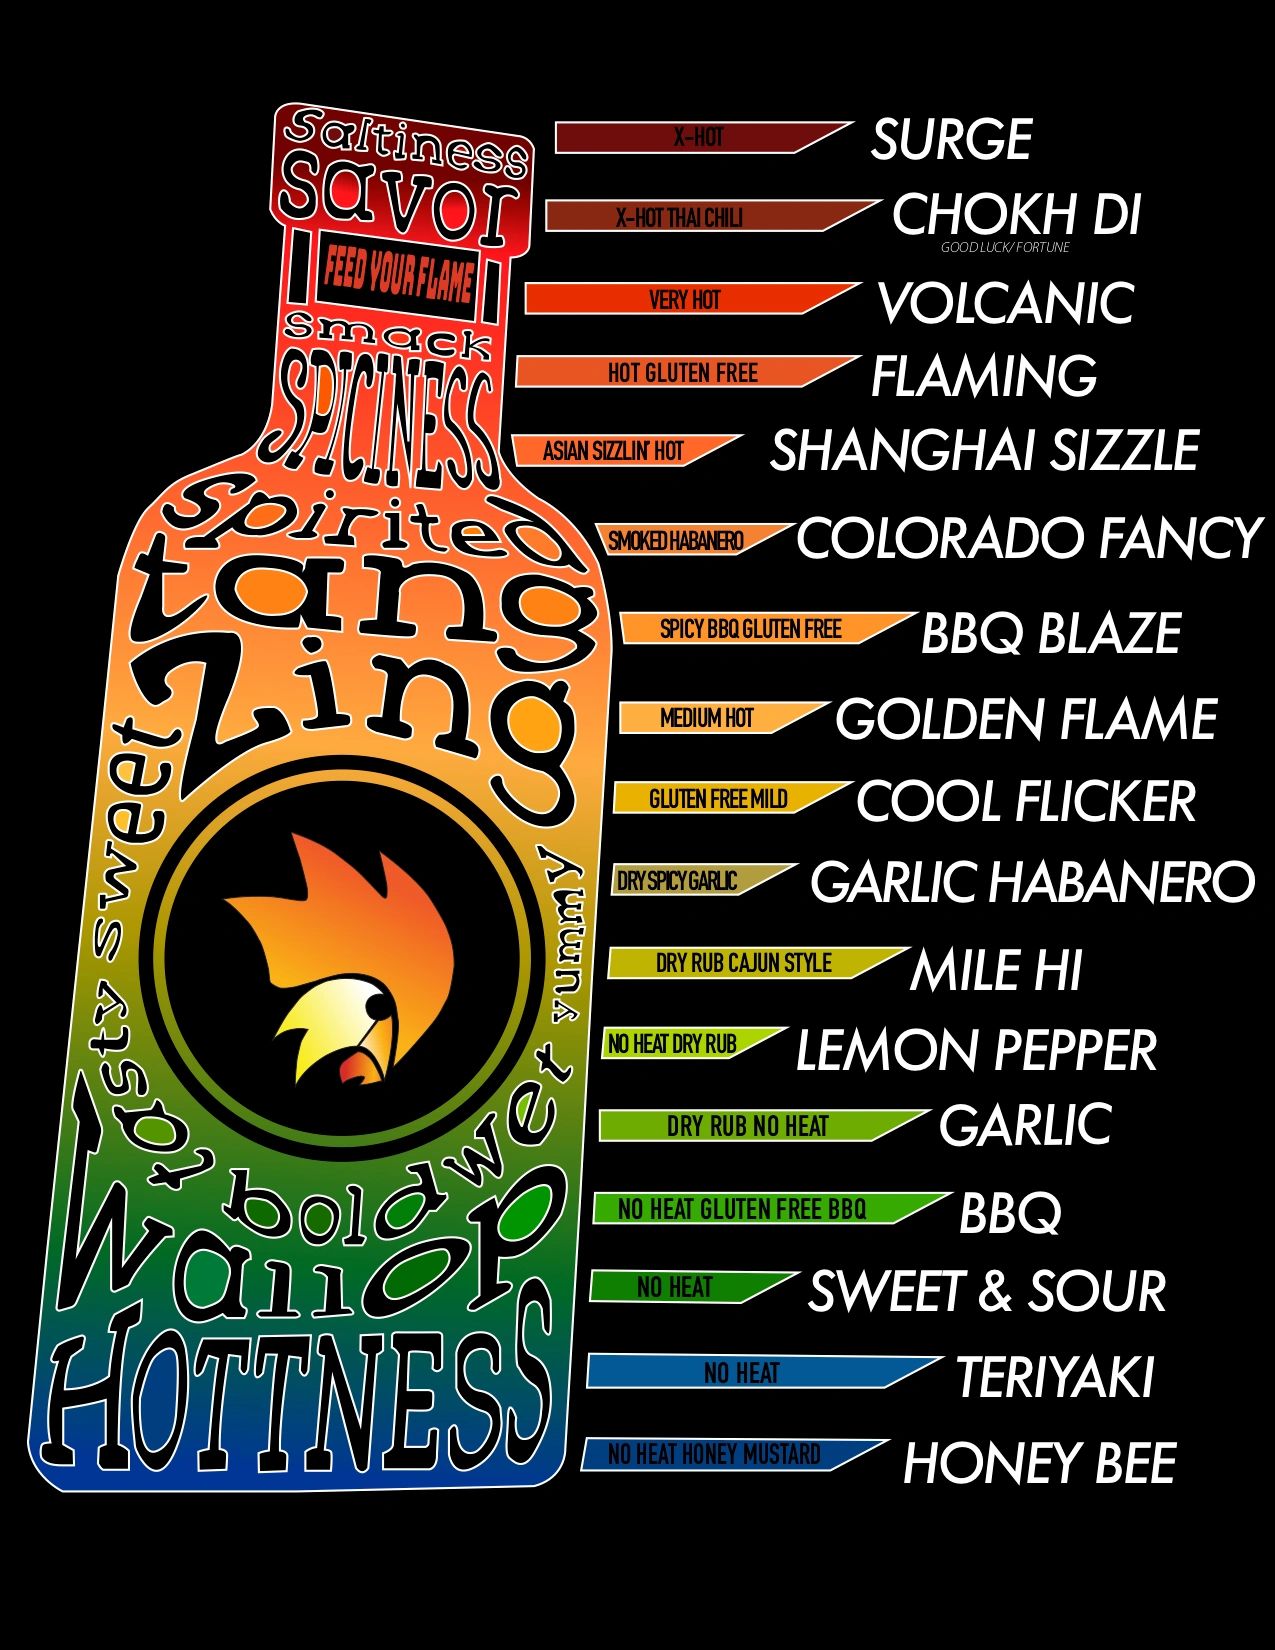 Golden Flame, Golden Flame Hot Wings sauces, Golden Flame sauces, Golden Flame Hot Wings sauce menu